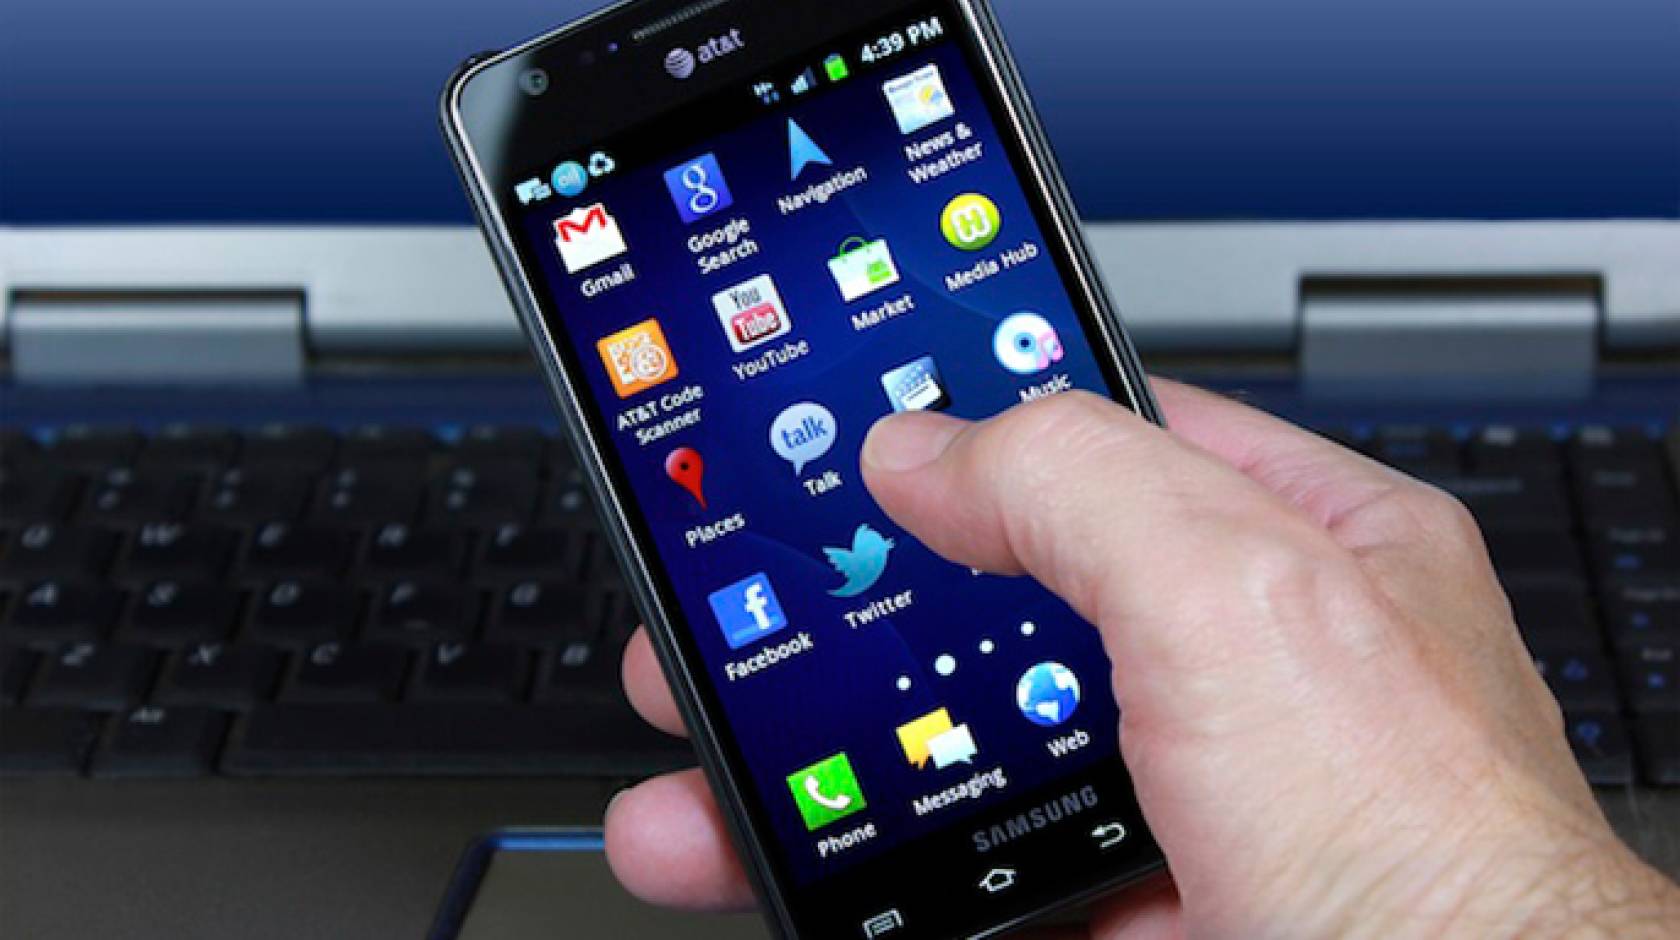 Popular android apps could be compromising users’ security, UCR researchers have shown.